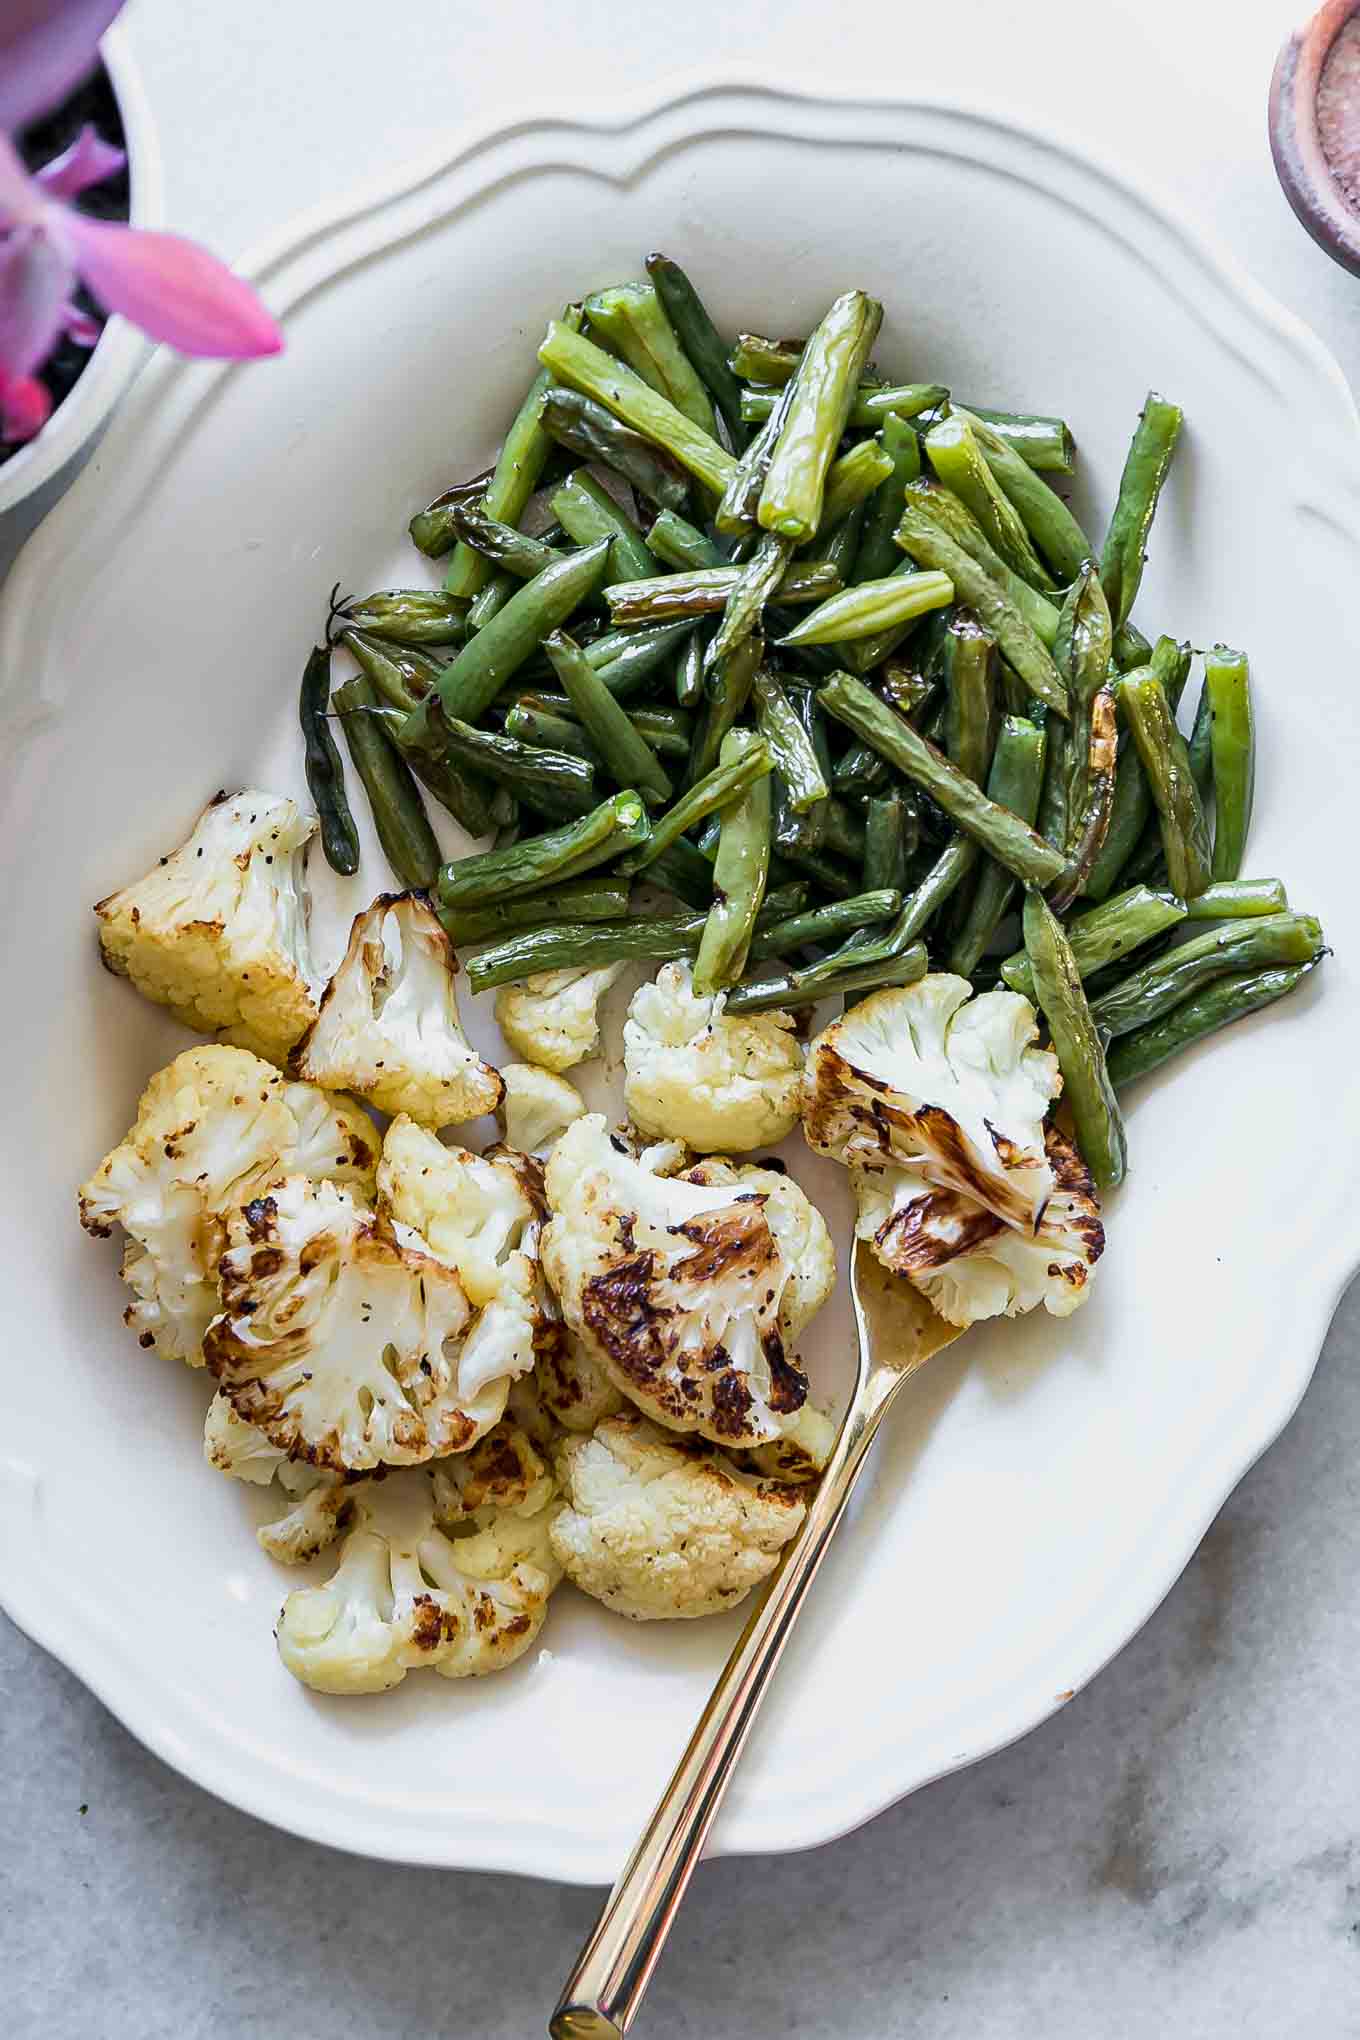 baked cauliflower and green beans on a white plate with a gold fork